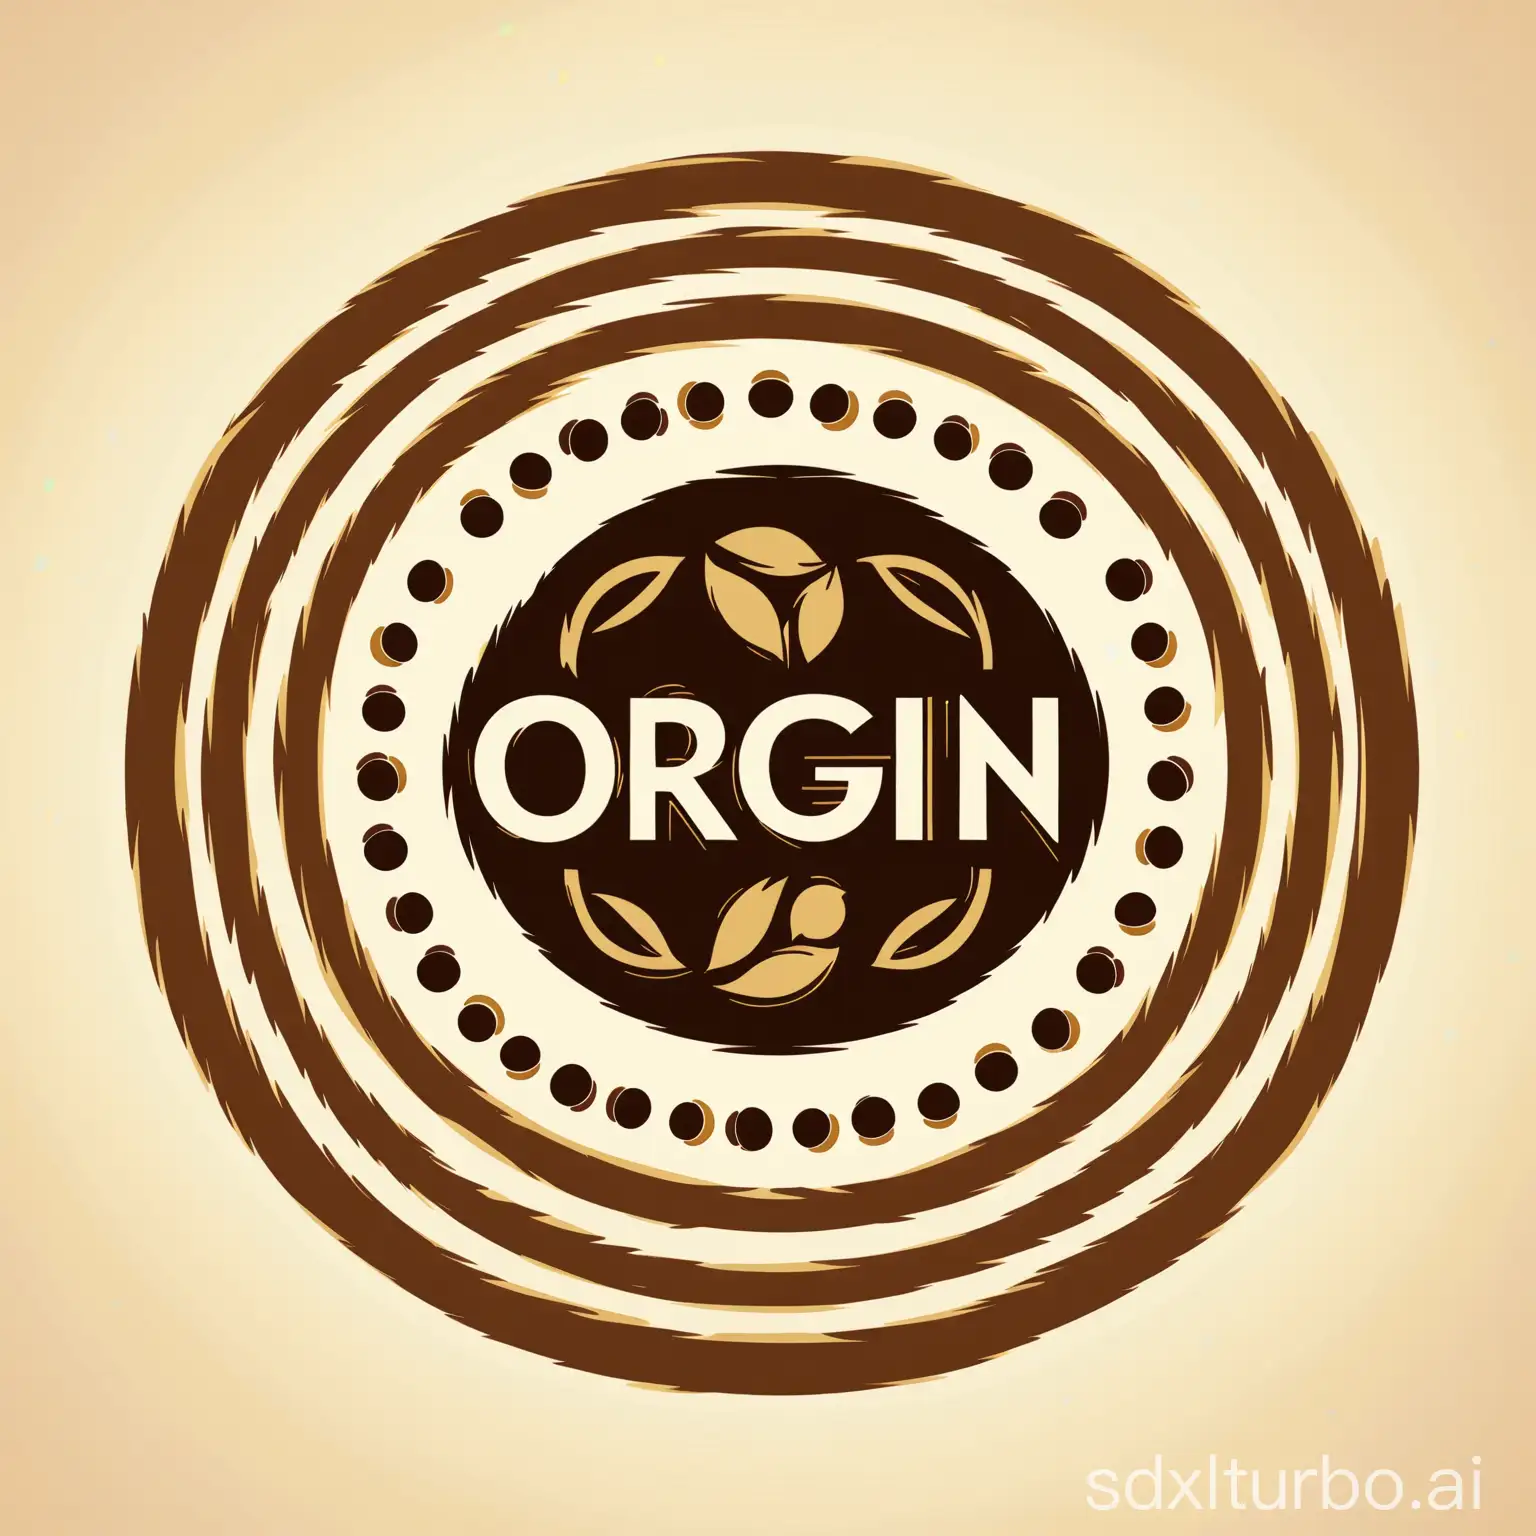 LOGO design concept: Color: Choose a combination of dark brown and gold to convey the original color and high quality of coffee.  Graphics: Based on the shape of coffee beans, integrate a simplified earth pattern to emphasize the brand's global perspective and respect for the coffee's place of origin.  Font: Use a modern yet somewhat retro font to reflect the brand's high-end positioning and tribute to tradition.  LOGO design description: Central graphic: An outline in the shape of a coffee bean, cleverly transitioning into a cross-section of the earth in the middle, with a pattern of coffee leaves on top, representing the natural growing environment of coffee. Text: The brand name "Origin Brew" in uppercase letters, positioned below the graphic, in gold, to highlight the brand's high-end positioning. Auxiliary graphic: In a corner of the LOGO, design a small and exquisite coffee cup pattern as a supplementary recognition element for the brand.